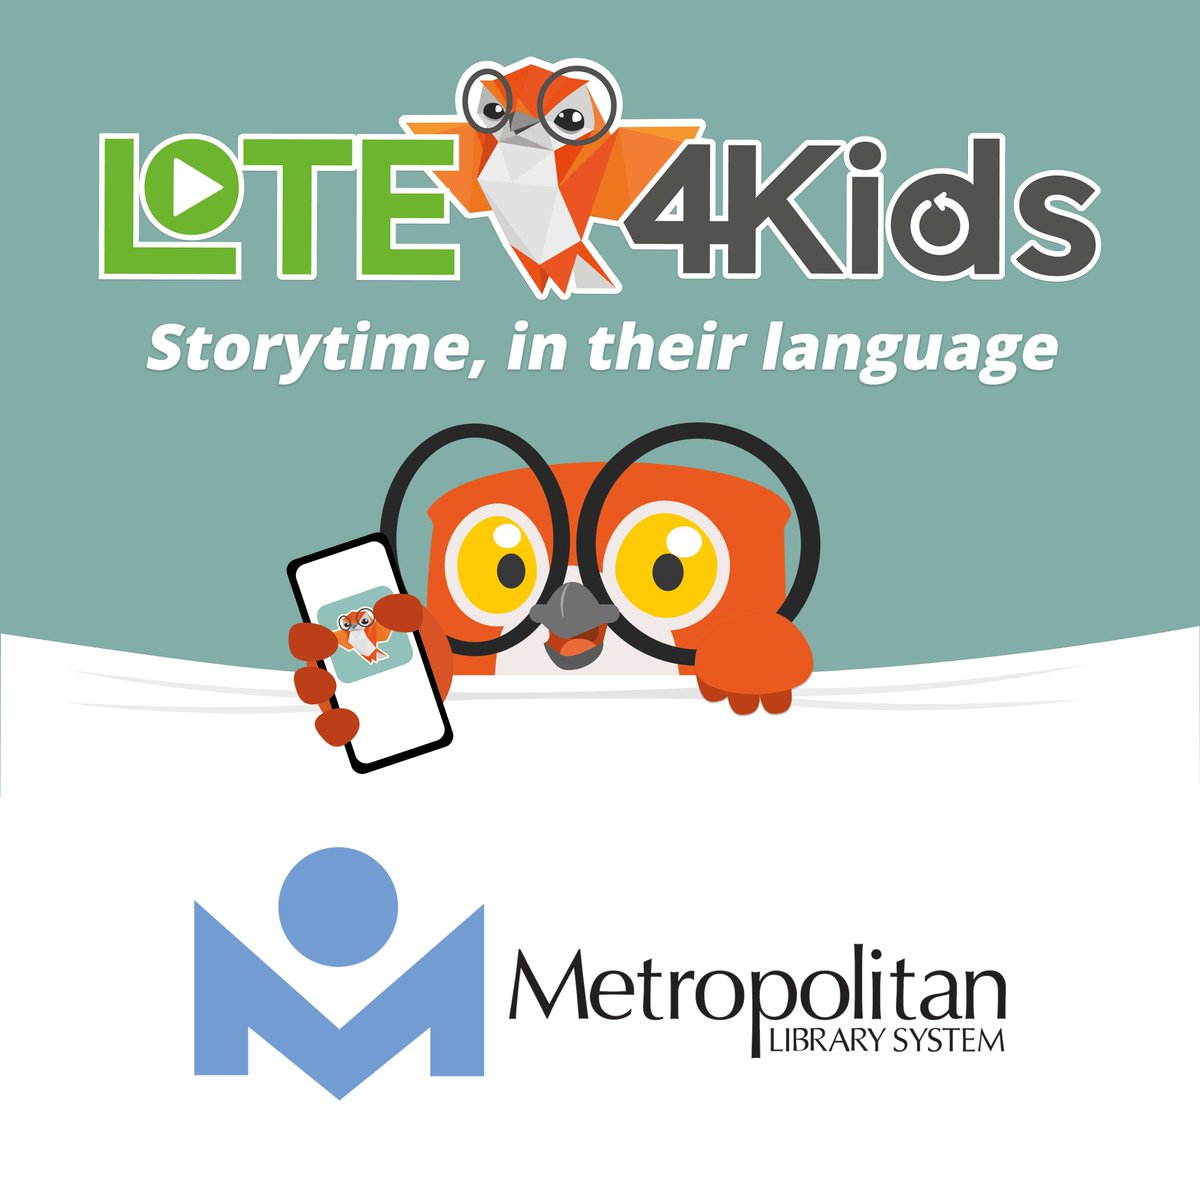 We're excited to share that we've got a new resource for our young library guests! Kids can now enjoy thousands of picture books in 65+ languages, with English translations! Explore Lote4Kids with your library card today: ow.ly/WBmQ50RwZSy